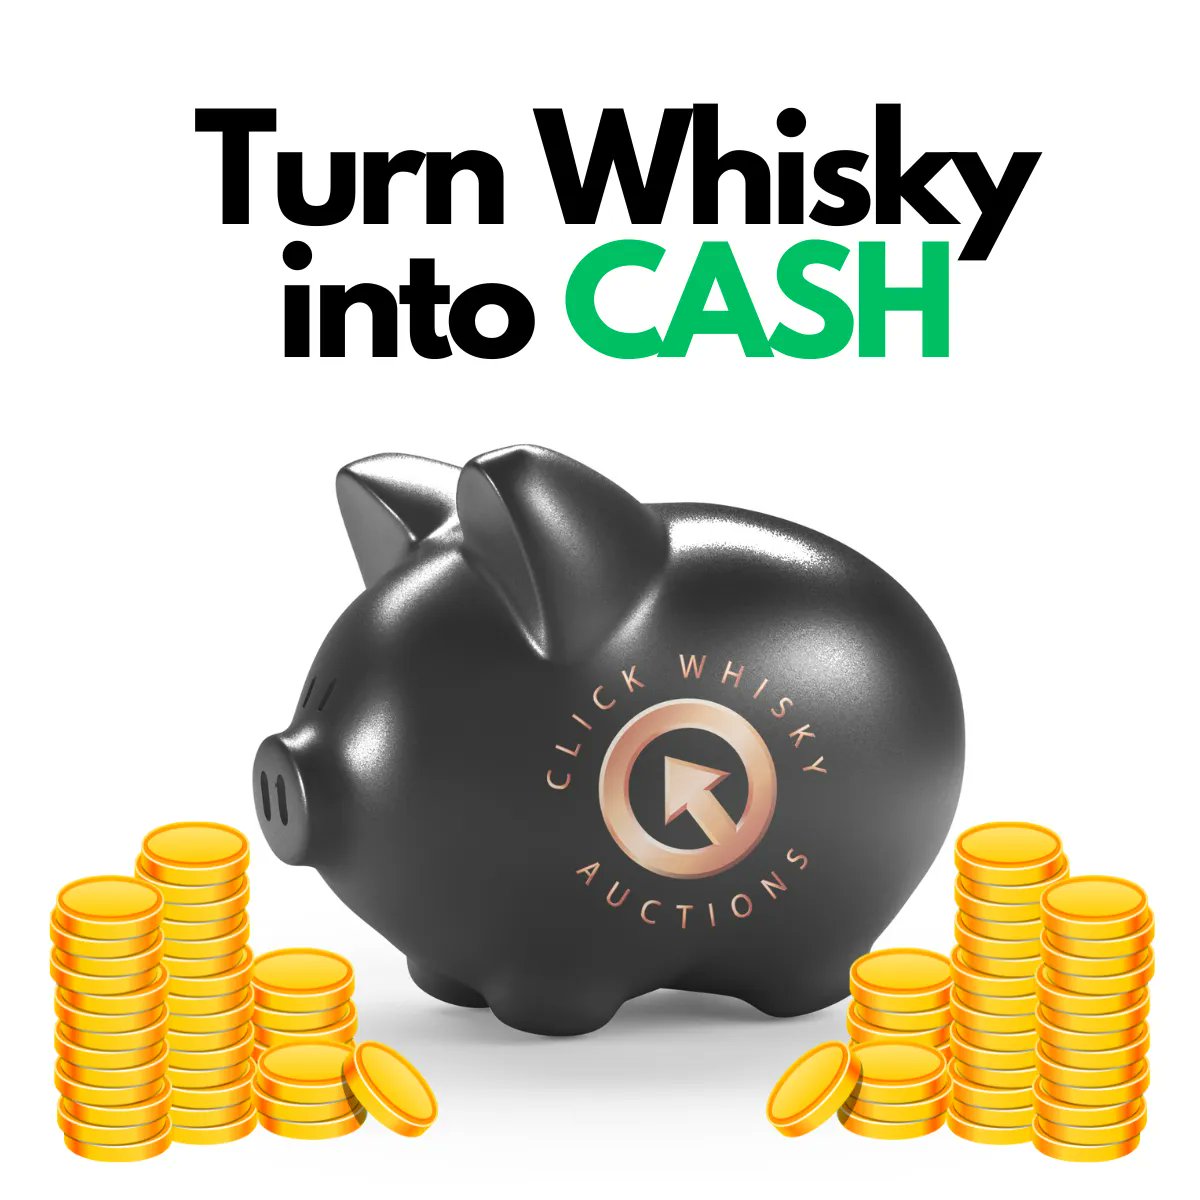 Have some whisky bottles lurking in your cupboards? Turn them into cash by selling them at auction for the best prices. We accept bottles from anywhere in U.K. contact us for more info #clickwhisky #clickwhiskyauctions #whisky #malt #sellwhisky #whiskyauction